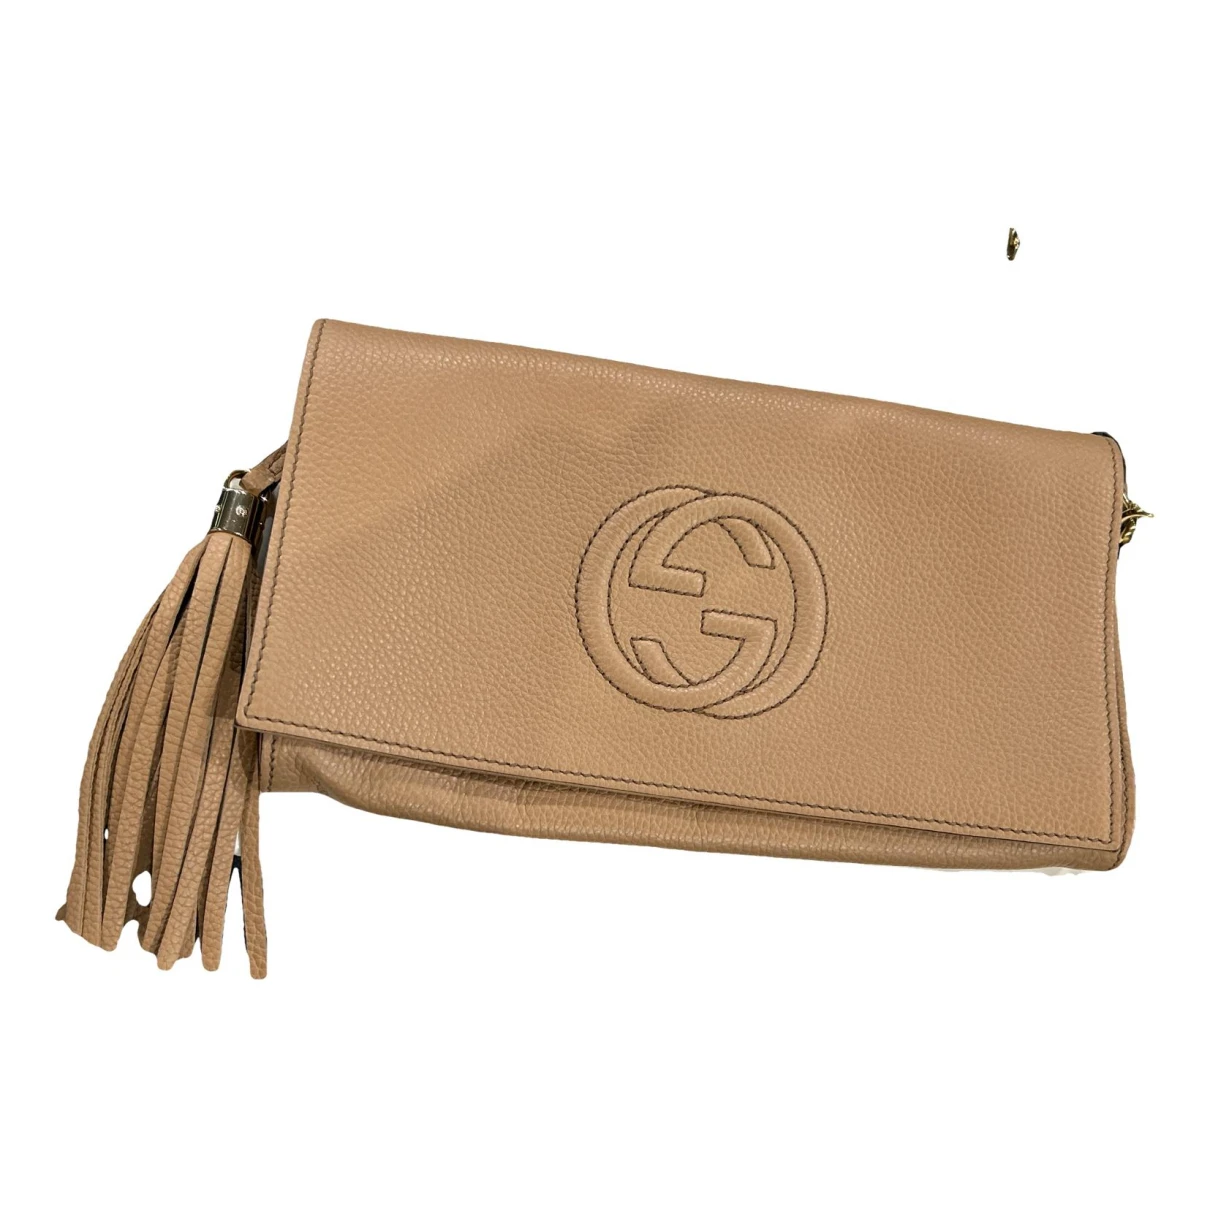 Pre-owned Gucci Soho Leather Clutch Bag In Beige